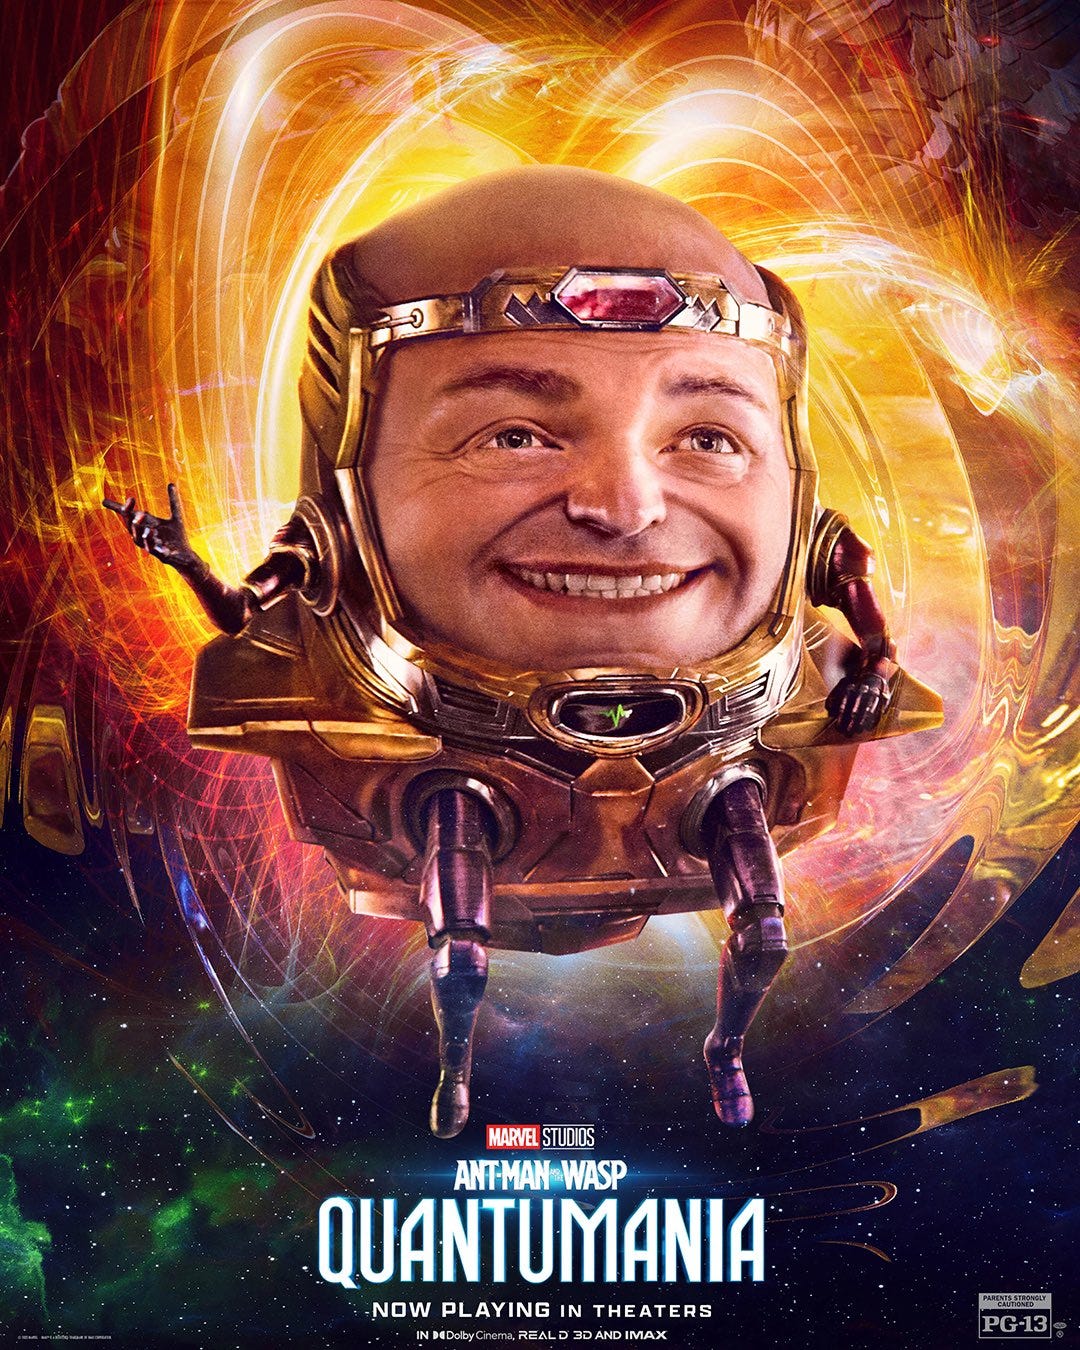 DiscussingFilm on Twitter: "First poster for MODOK in 'ANT-MAN AND THE WASP:  QUANTUMANIA'. Read our review: https://t.co/P3UUjlBNn5  https://t.co/NIeGTZq68t" / Twitter